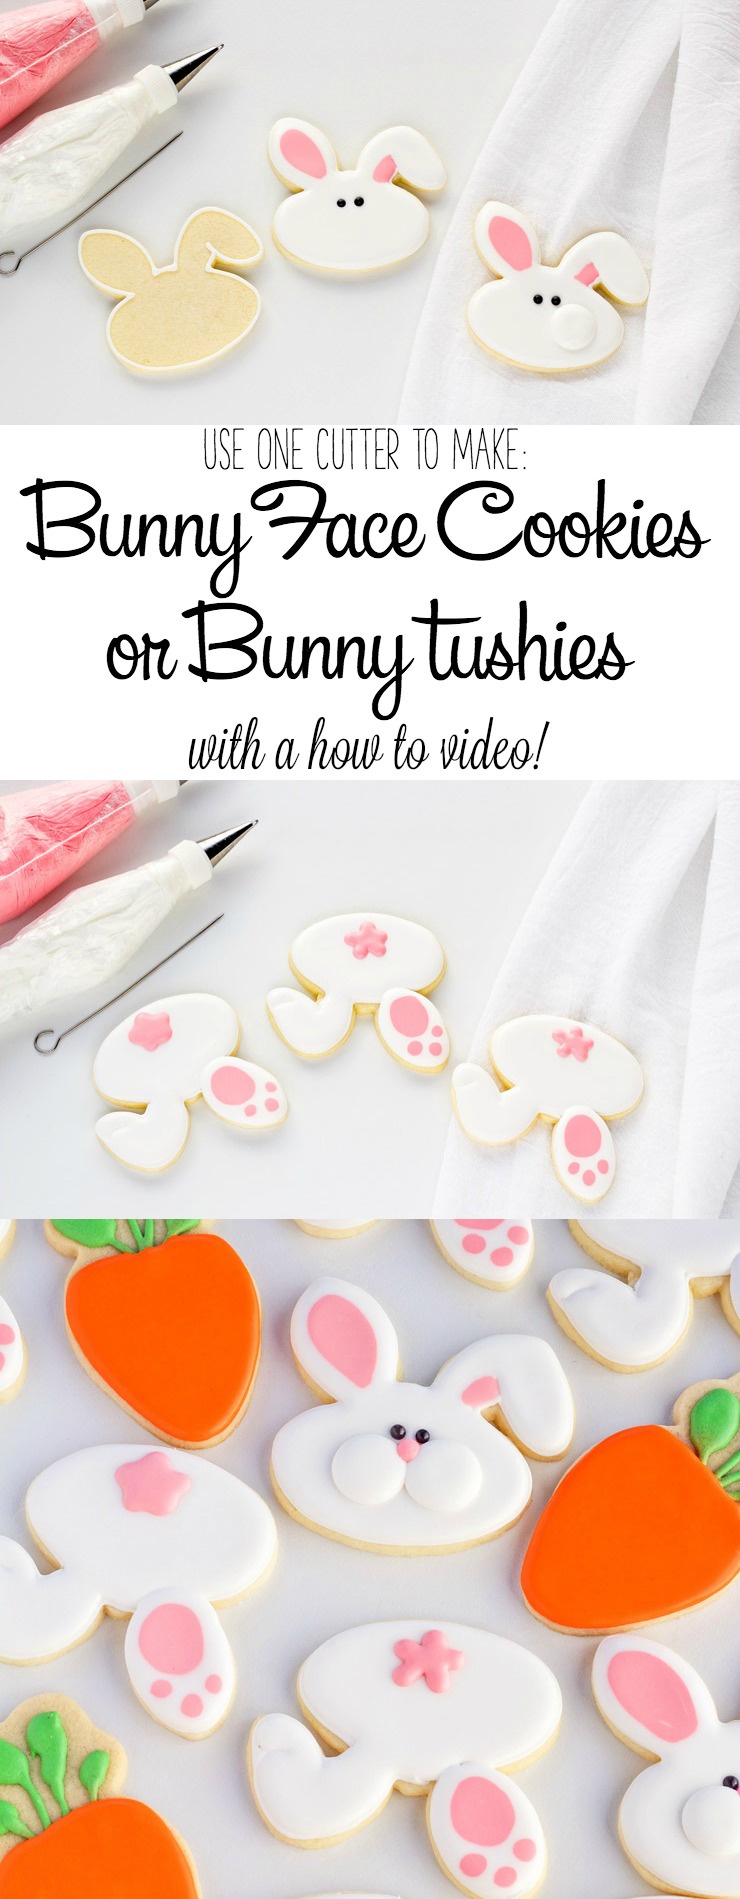 How to Use One Cookie Cutter to Make Bunny Face Cookies or Cute Little Bunny Tushies with a Video Tutorial | The Bearfoot Baker